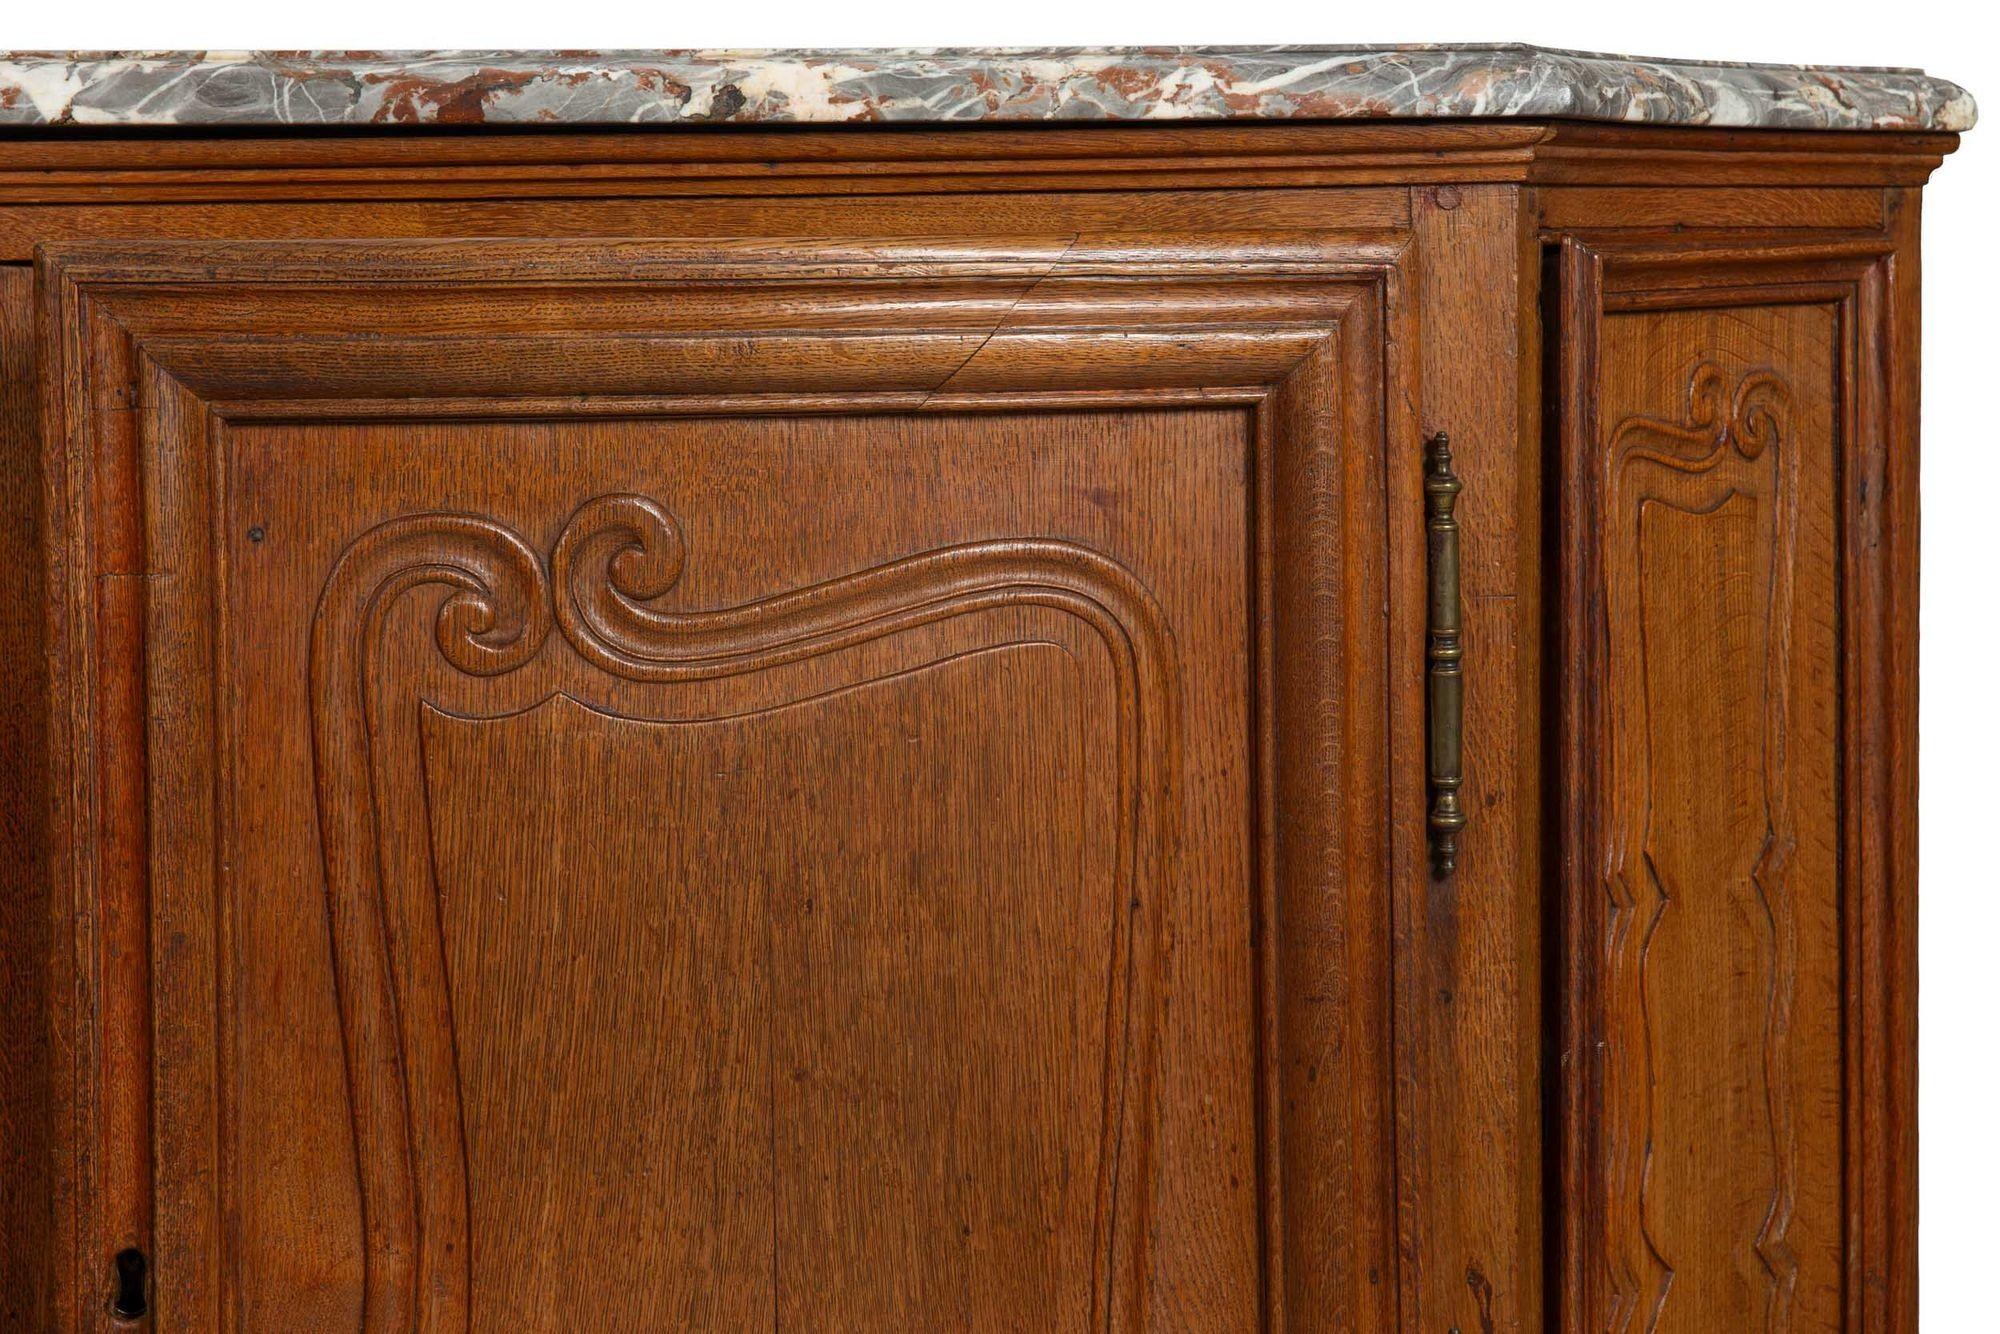 French Provincial Antique Oak and Marble Buffet Sideboard Cabinet ca. 1880 For Sale 9